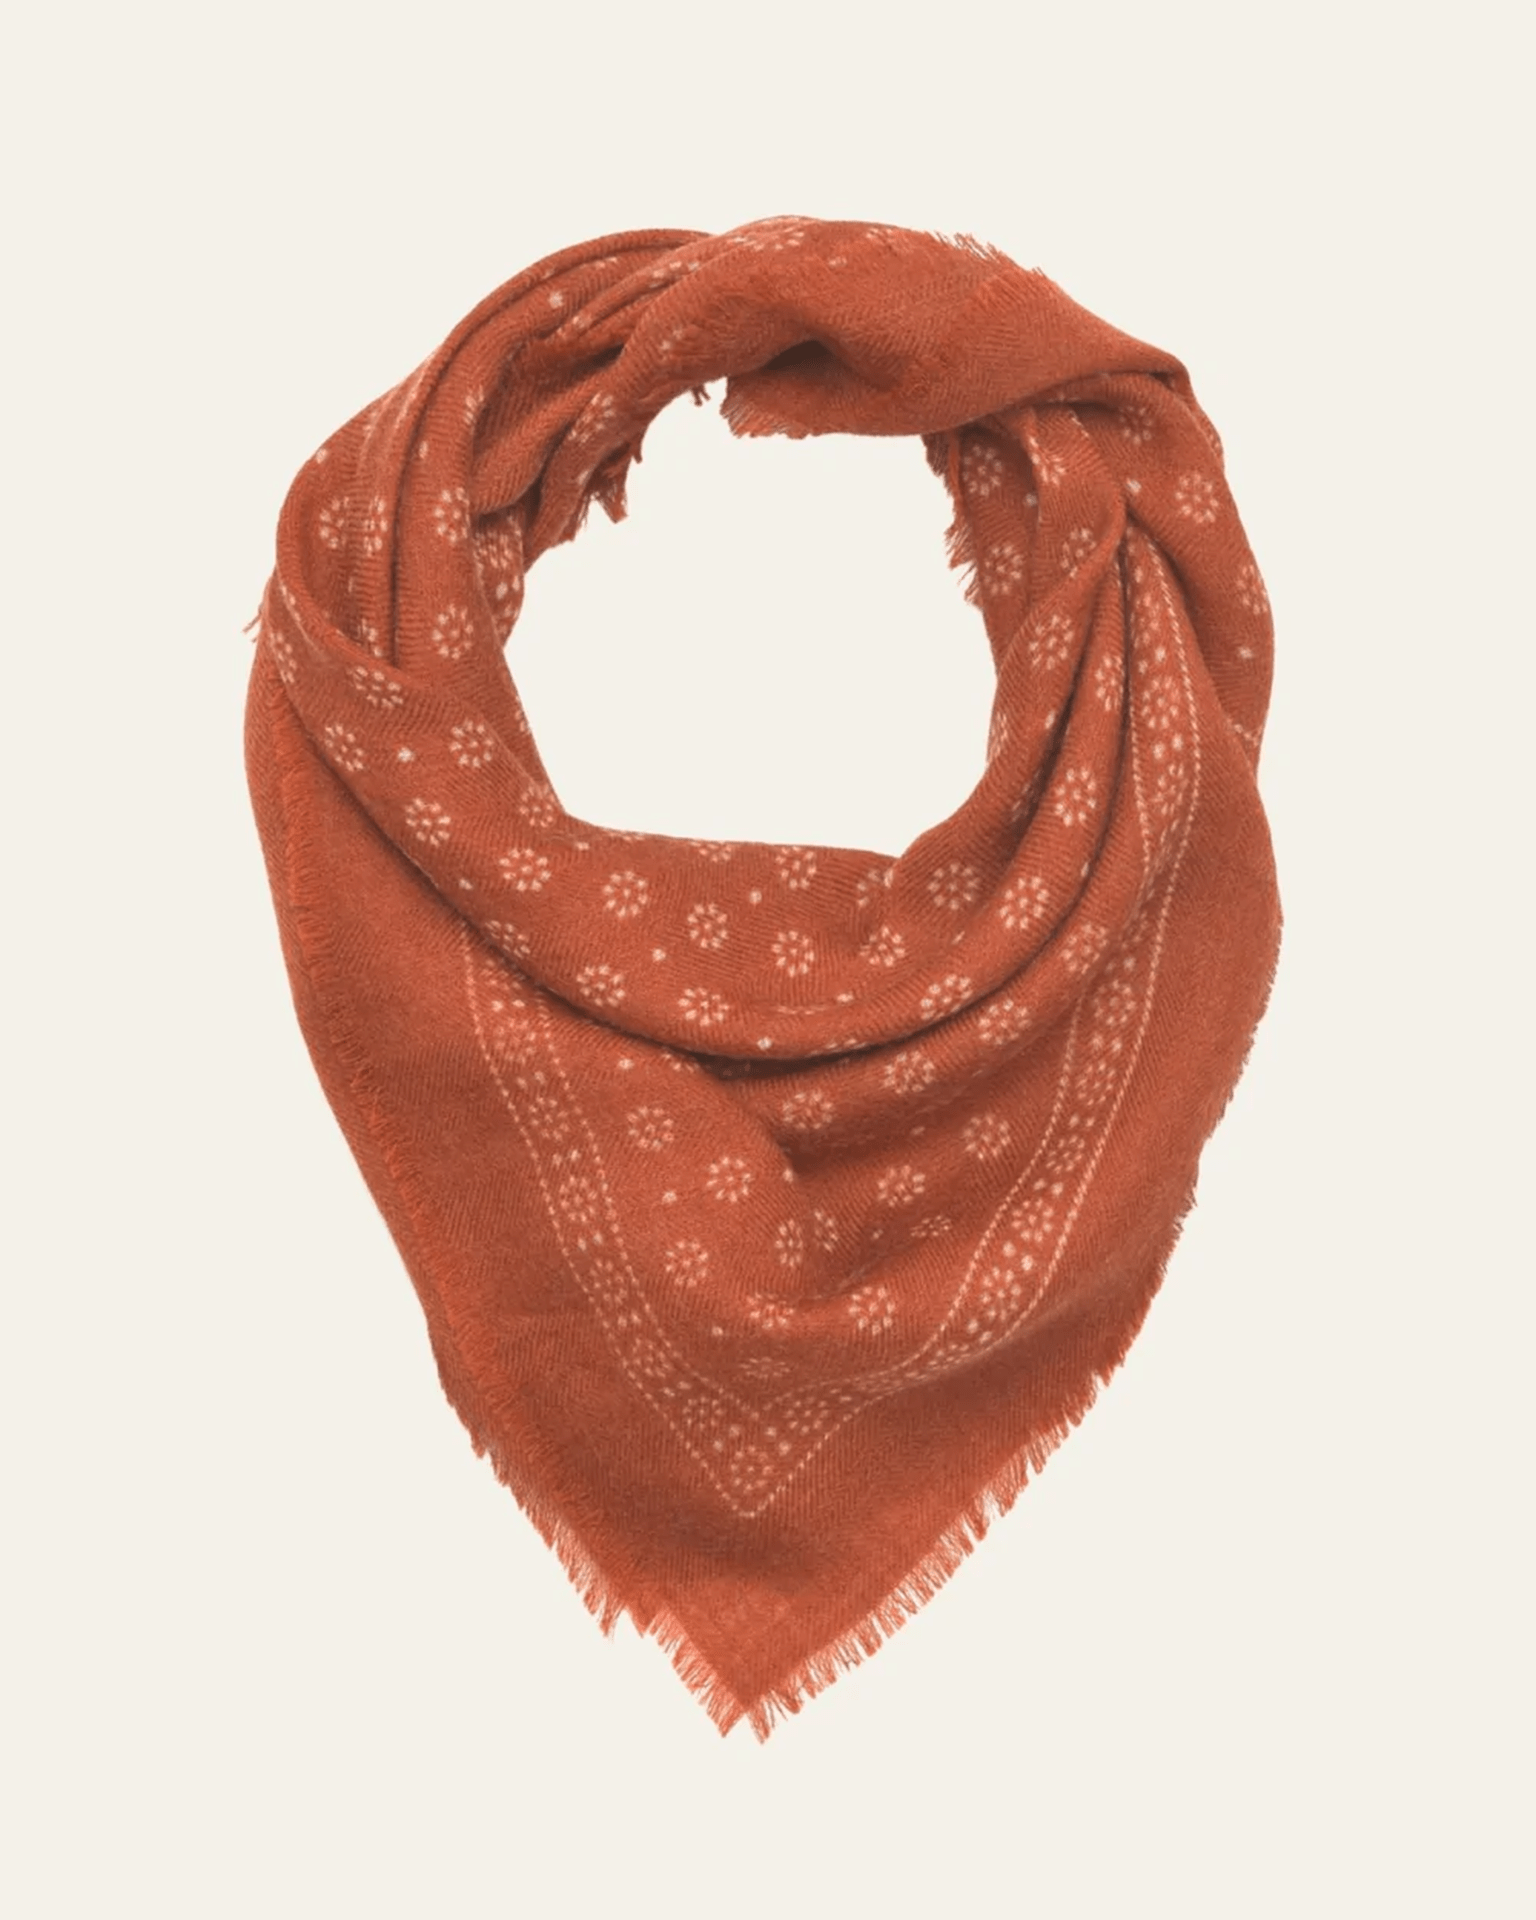 Mois Mont No 608 Wool Bandana in Coffee - Bliss Boutiques